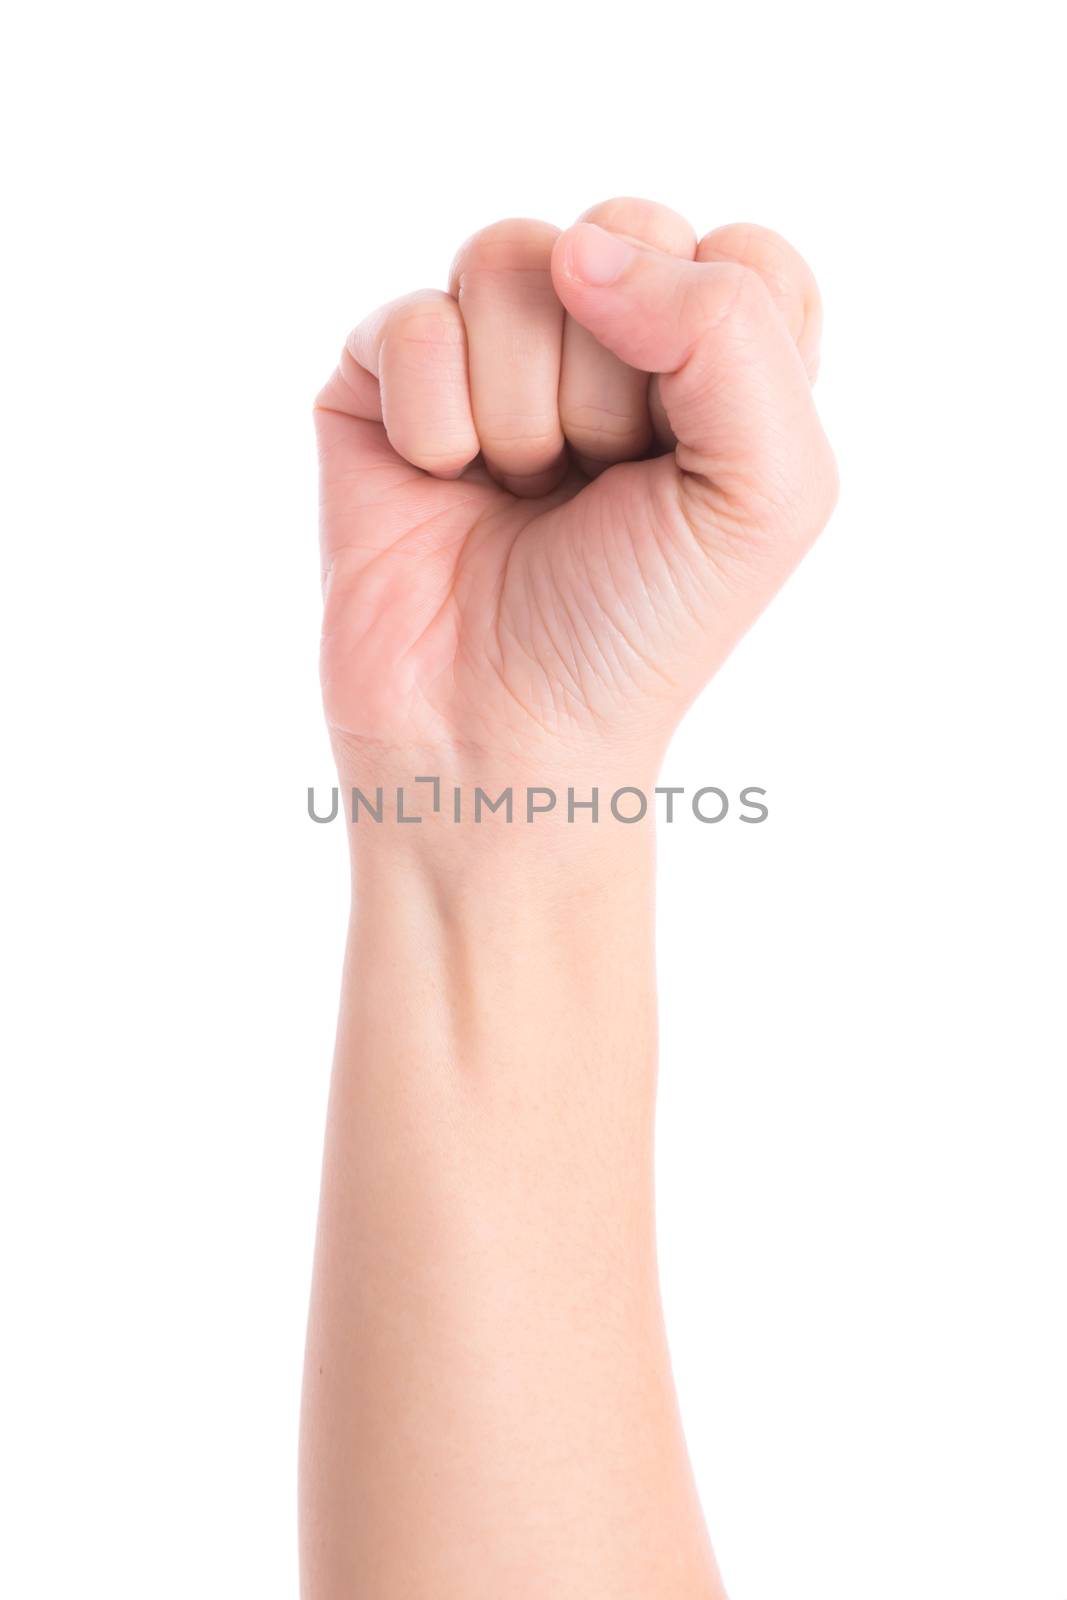 woman's hand is counting number 0 or Zero isolated on white  background. The concept of hand symbols in counting numbers in order to communicate using gestures.